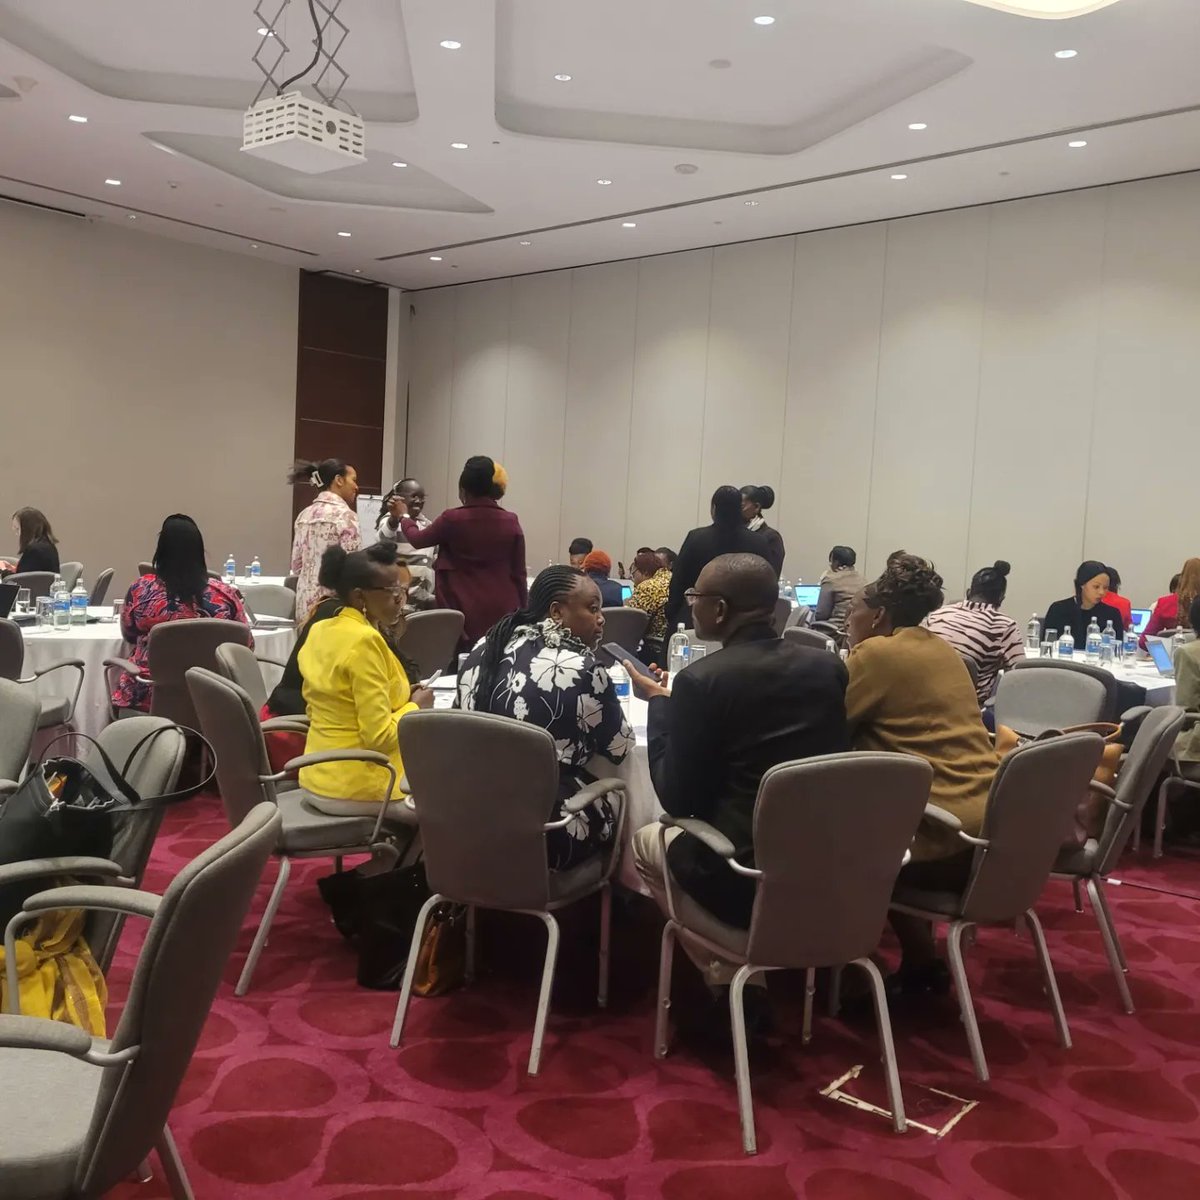 We attended GOK Consultative Forum on Women's Rights to give views on Women in Health.The welcome address given by Hon. Harriet Chiggai-Advisor to the President on Women's Rights. Keynote Address  by Hon.Gladys Boss Shollei-Deputy Speaker of the National Assembly.
#WomenRightsKE